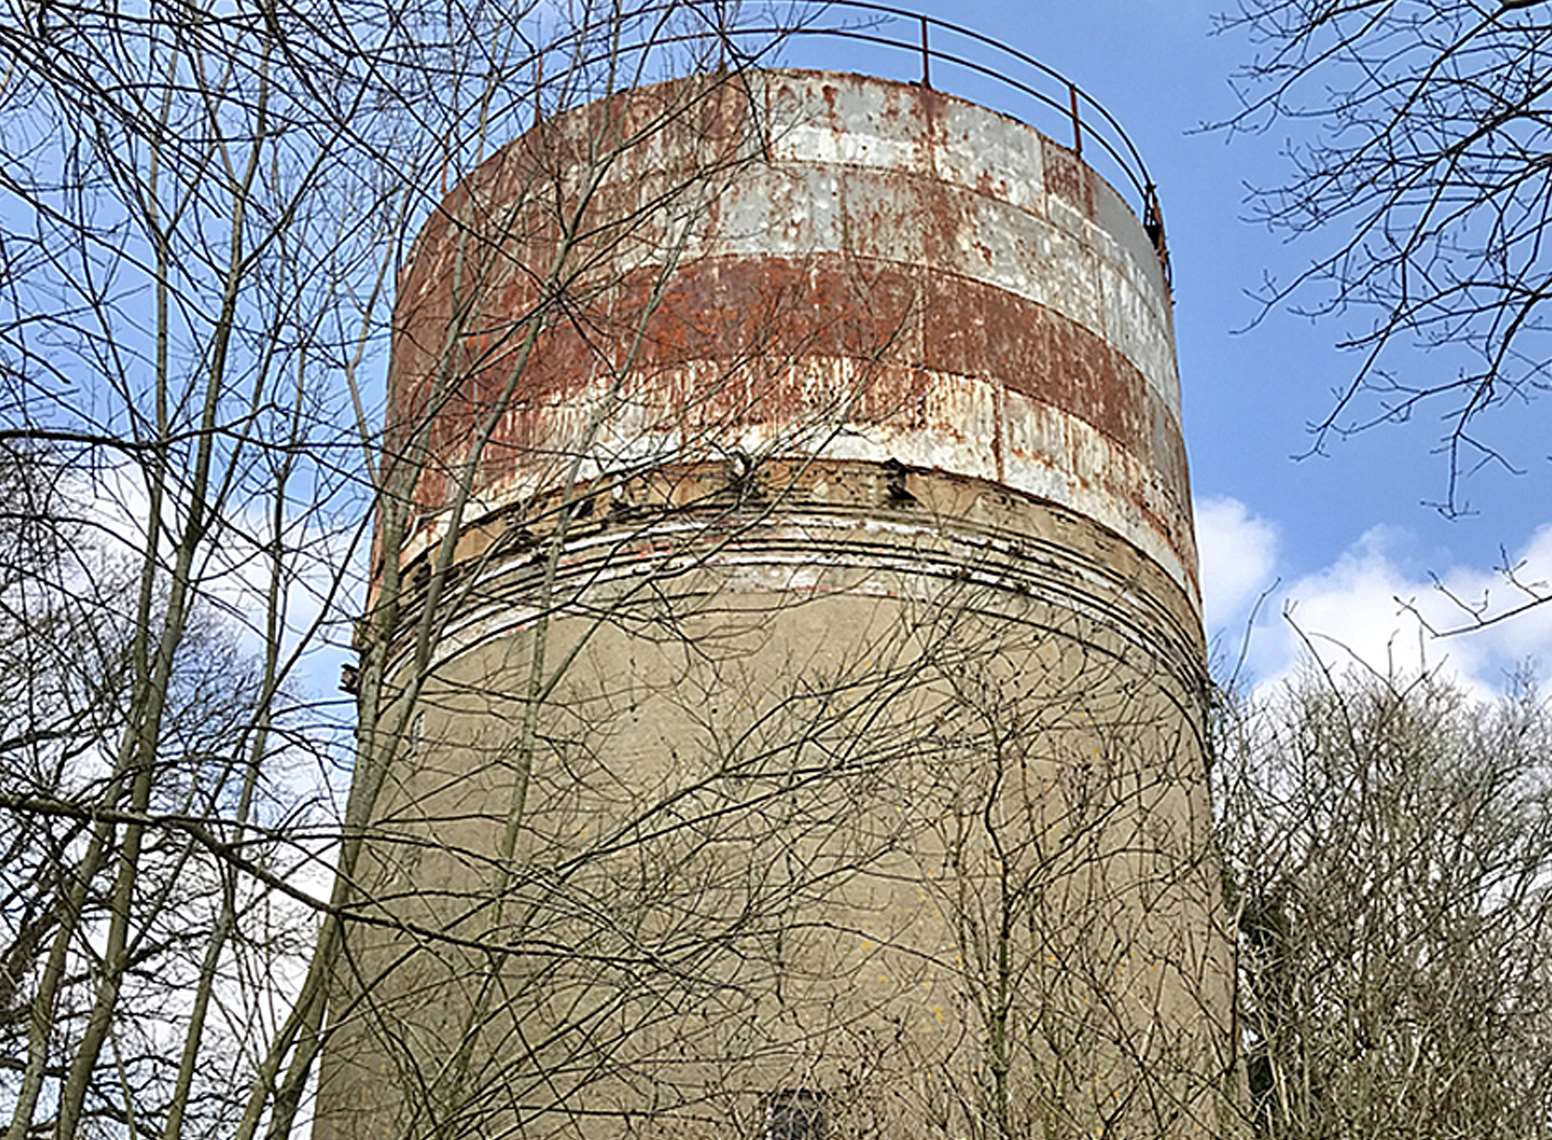 The former water tower at Whitfield, up for auction